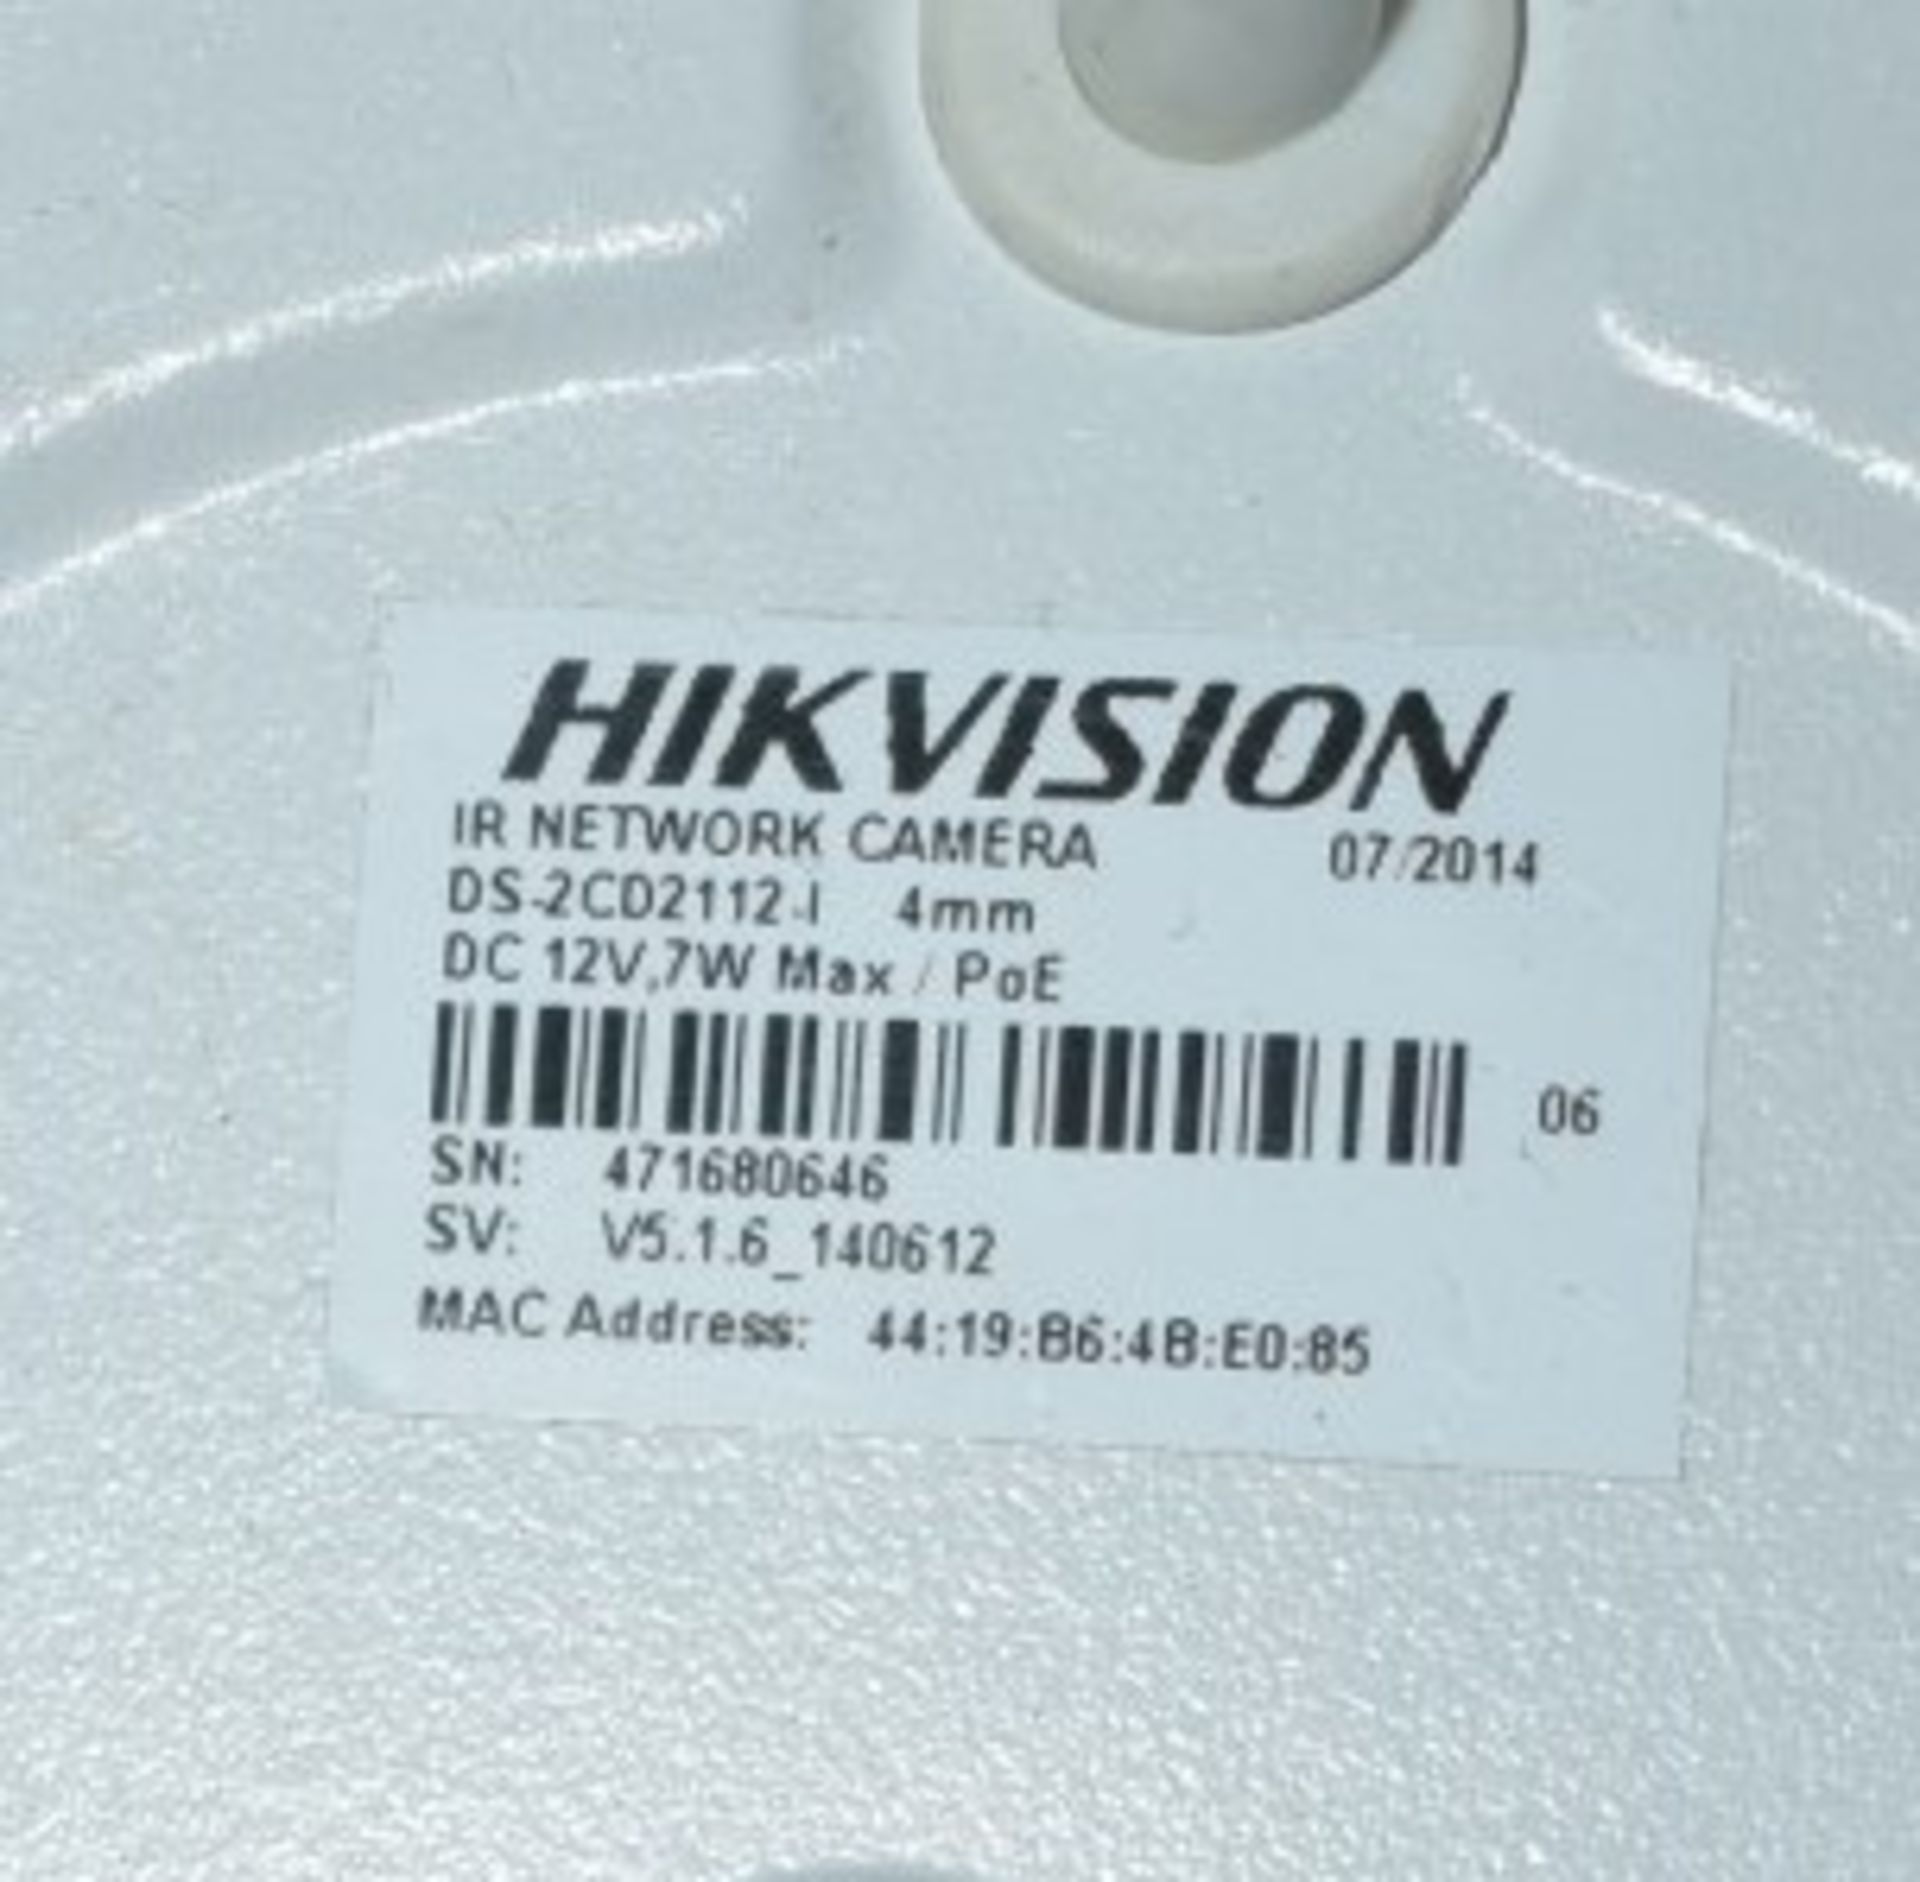 1 x Hikvision Digital CCTV 8 Channel Video Recorder With 7 x Infra Red Network Cameras - Image 9 of 9